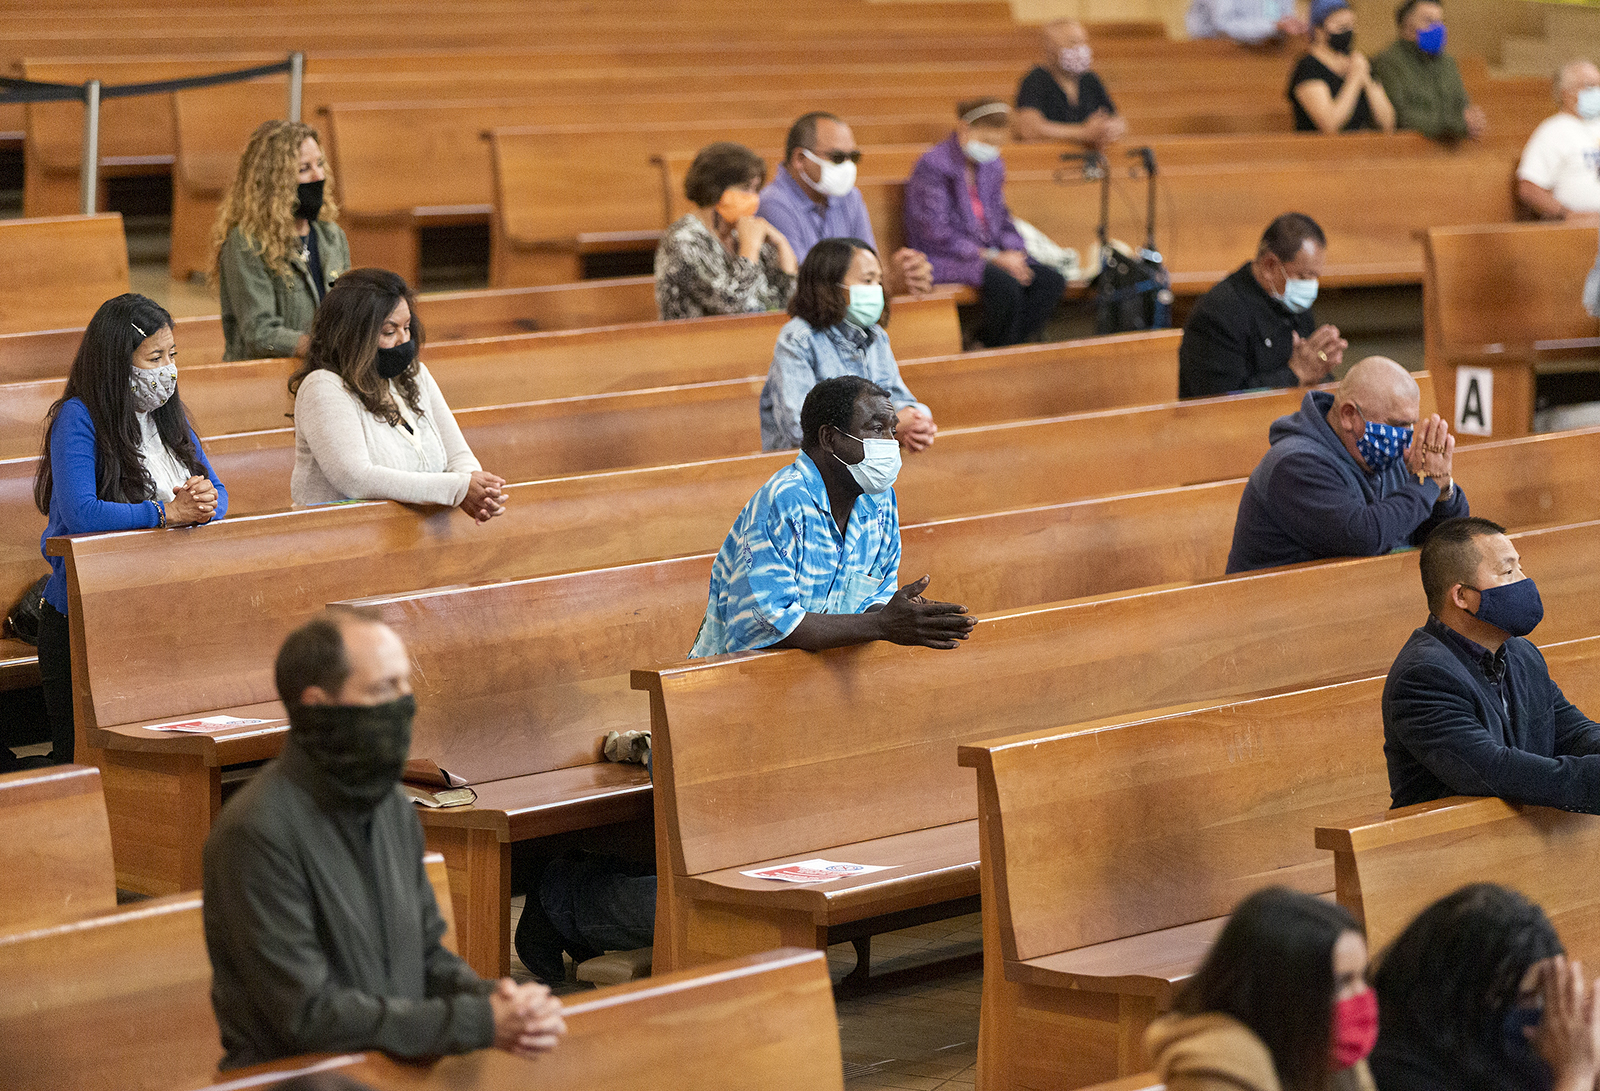 Congregants kneel and observe social distancing while listening to Los Angeles Archbishop Jose H. Gomez celebrate Mass at Cathedral of Our Lady of the Angels in downtown Los Angeles on June 7, 2020. (AP Photo/Damian Dovarganes)